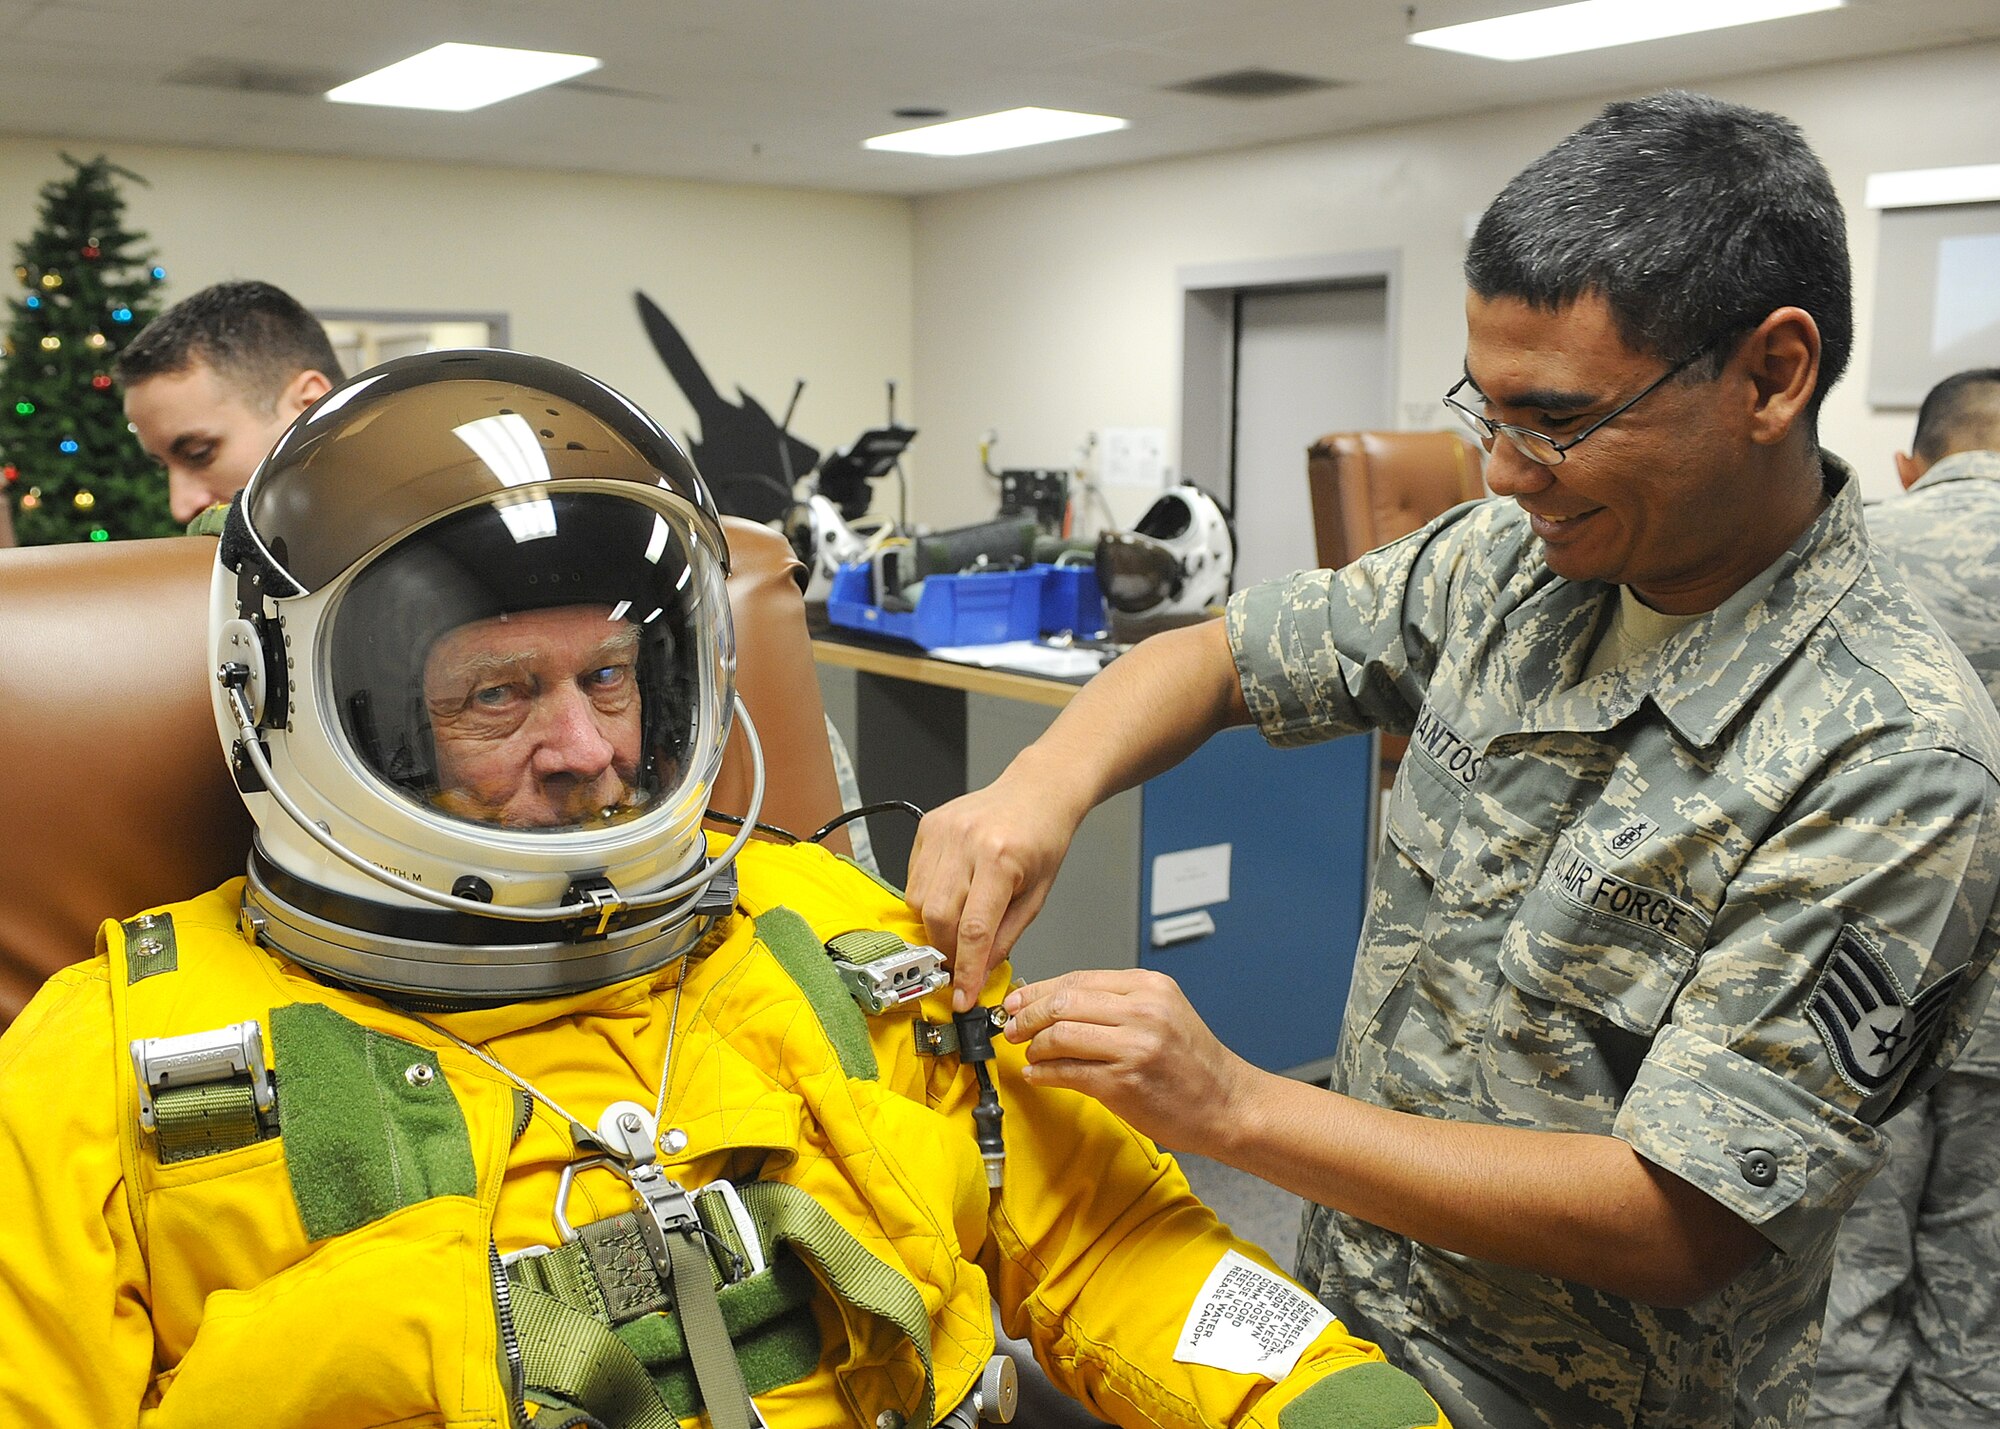 Staff Sgt. Ryan Santos with the 9th Physiology Support Squadron fits Mr. Oliver "Ollie" Crawford into a pressure suite in prepartion for his high-flight in the U-2 Dragon Lady. In December 2009, Mr. Crawford was the oldest person to recieve a high-flight in the U-2. (U.S. Air Force Photo/ John Schwab)